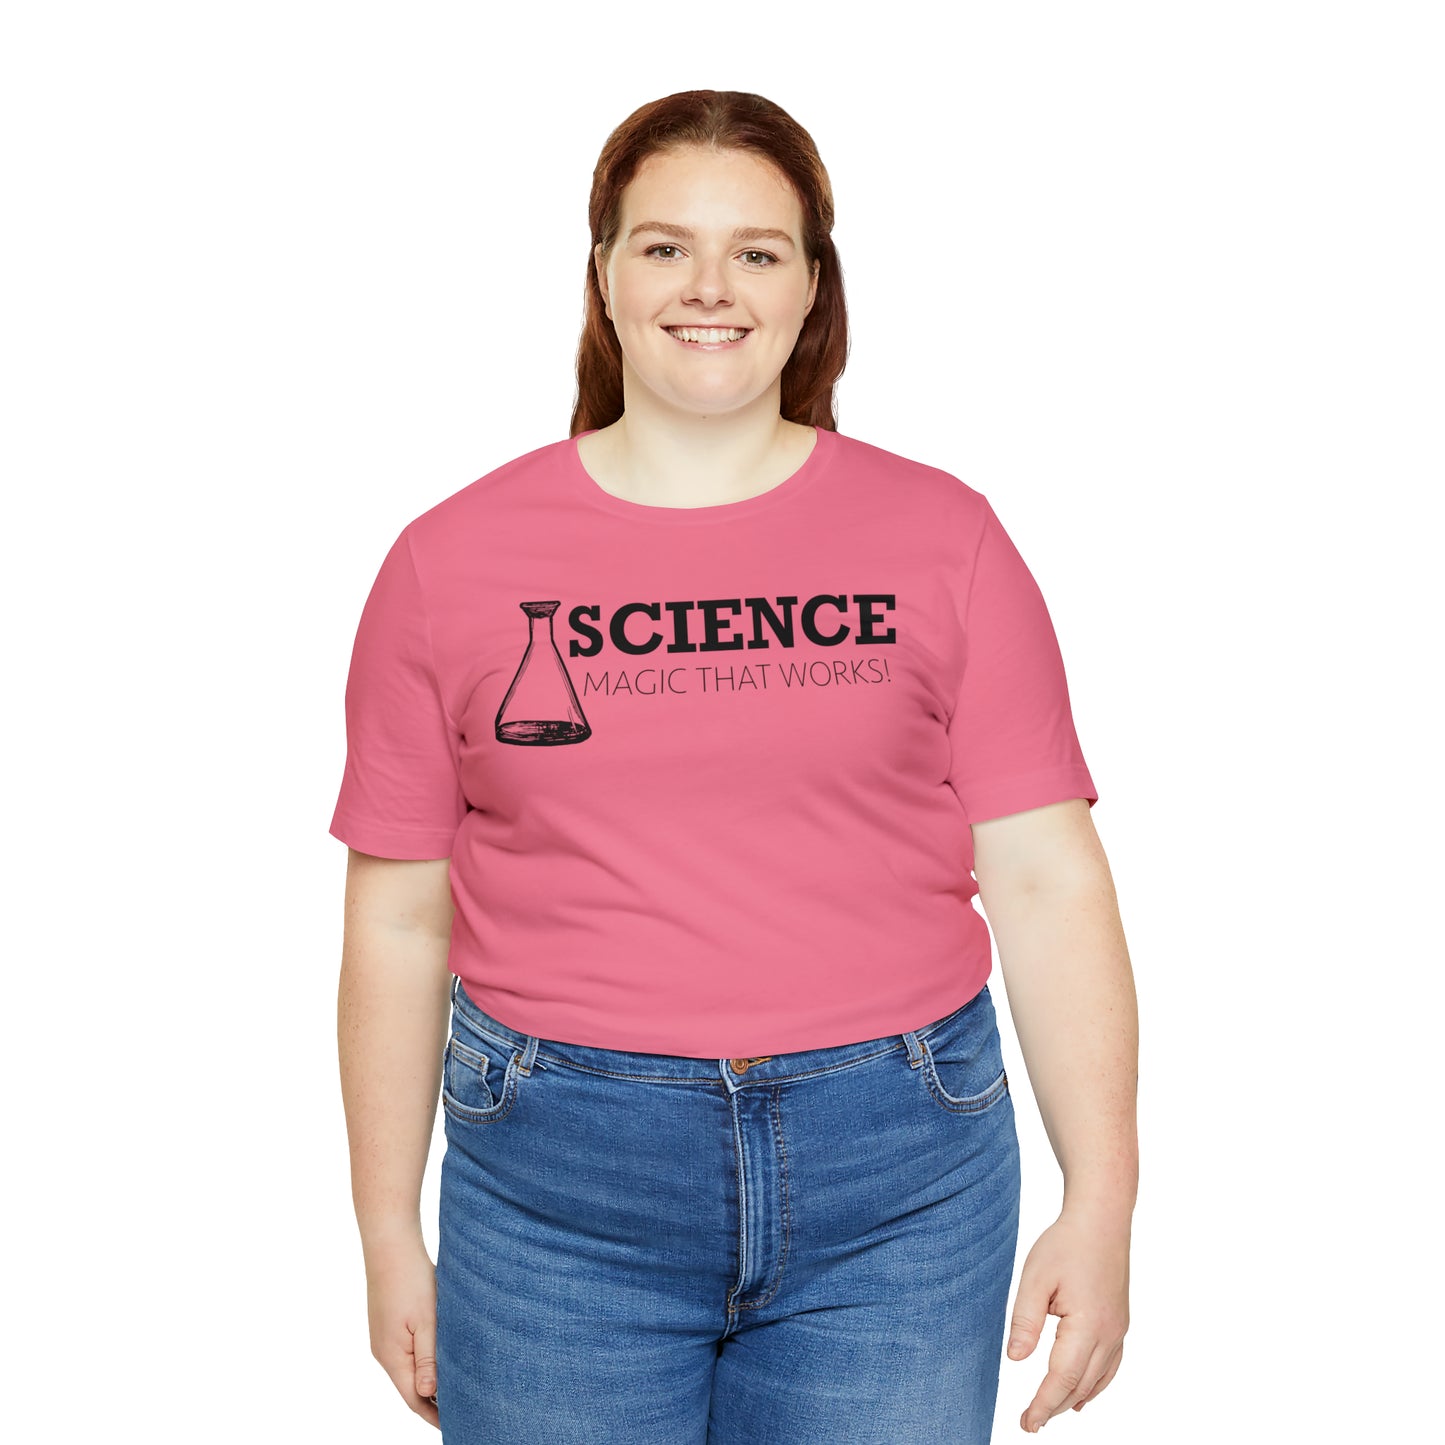 Science, Magic That Works - Unisex Jersey Short Sleeve Tee